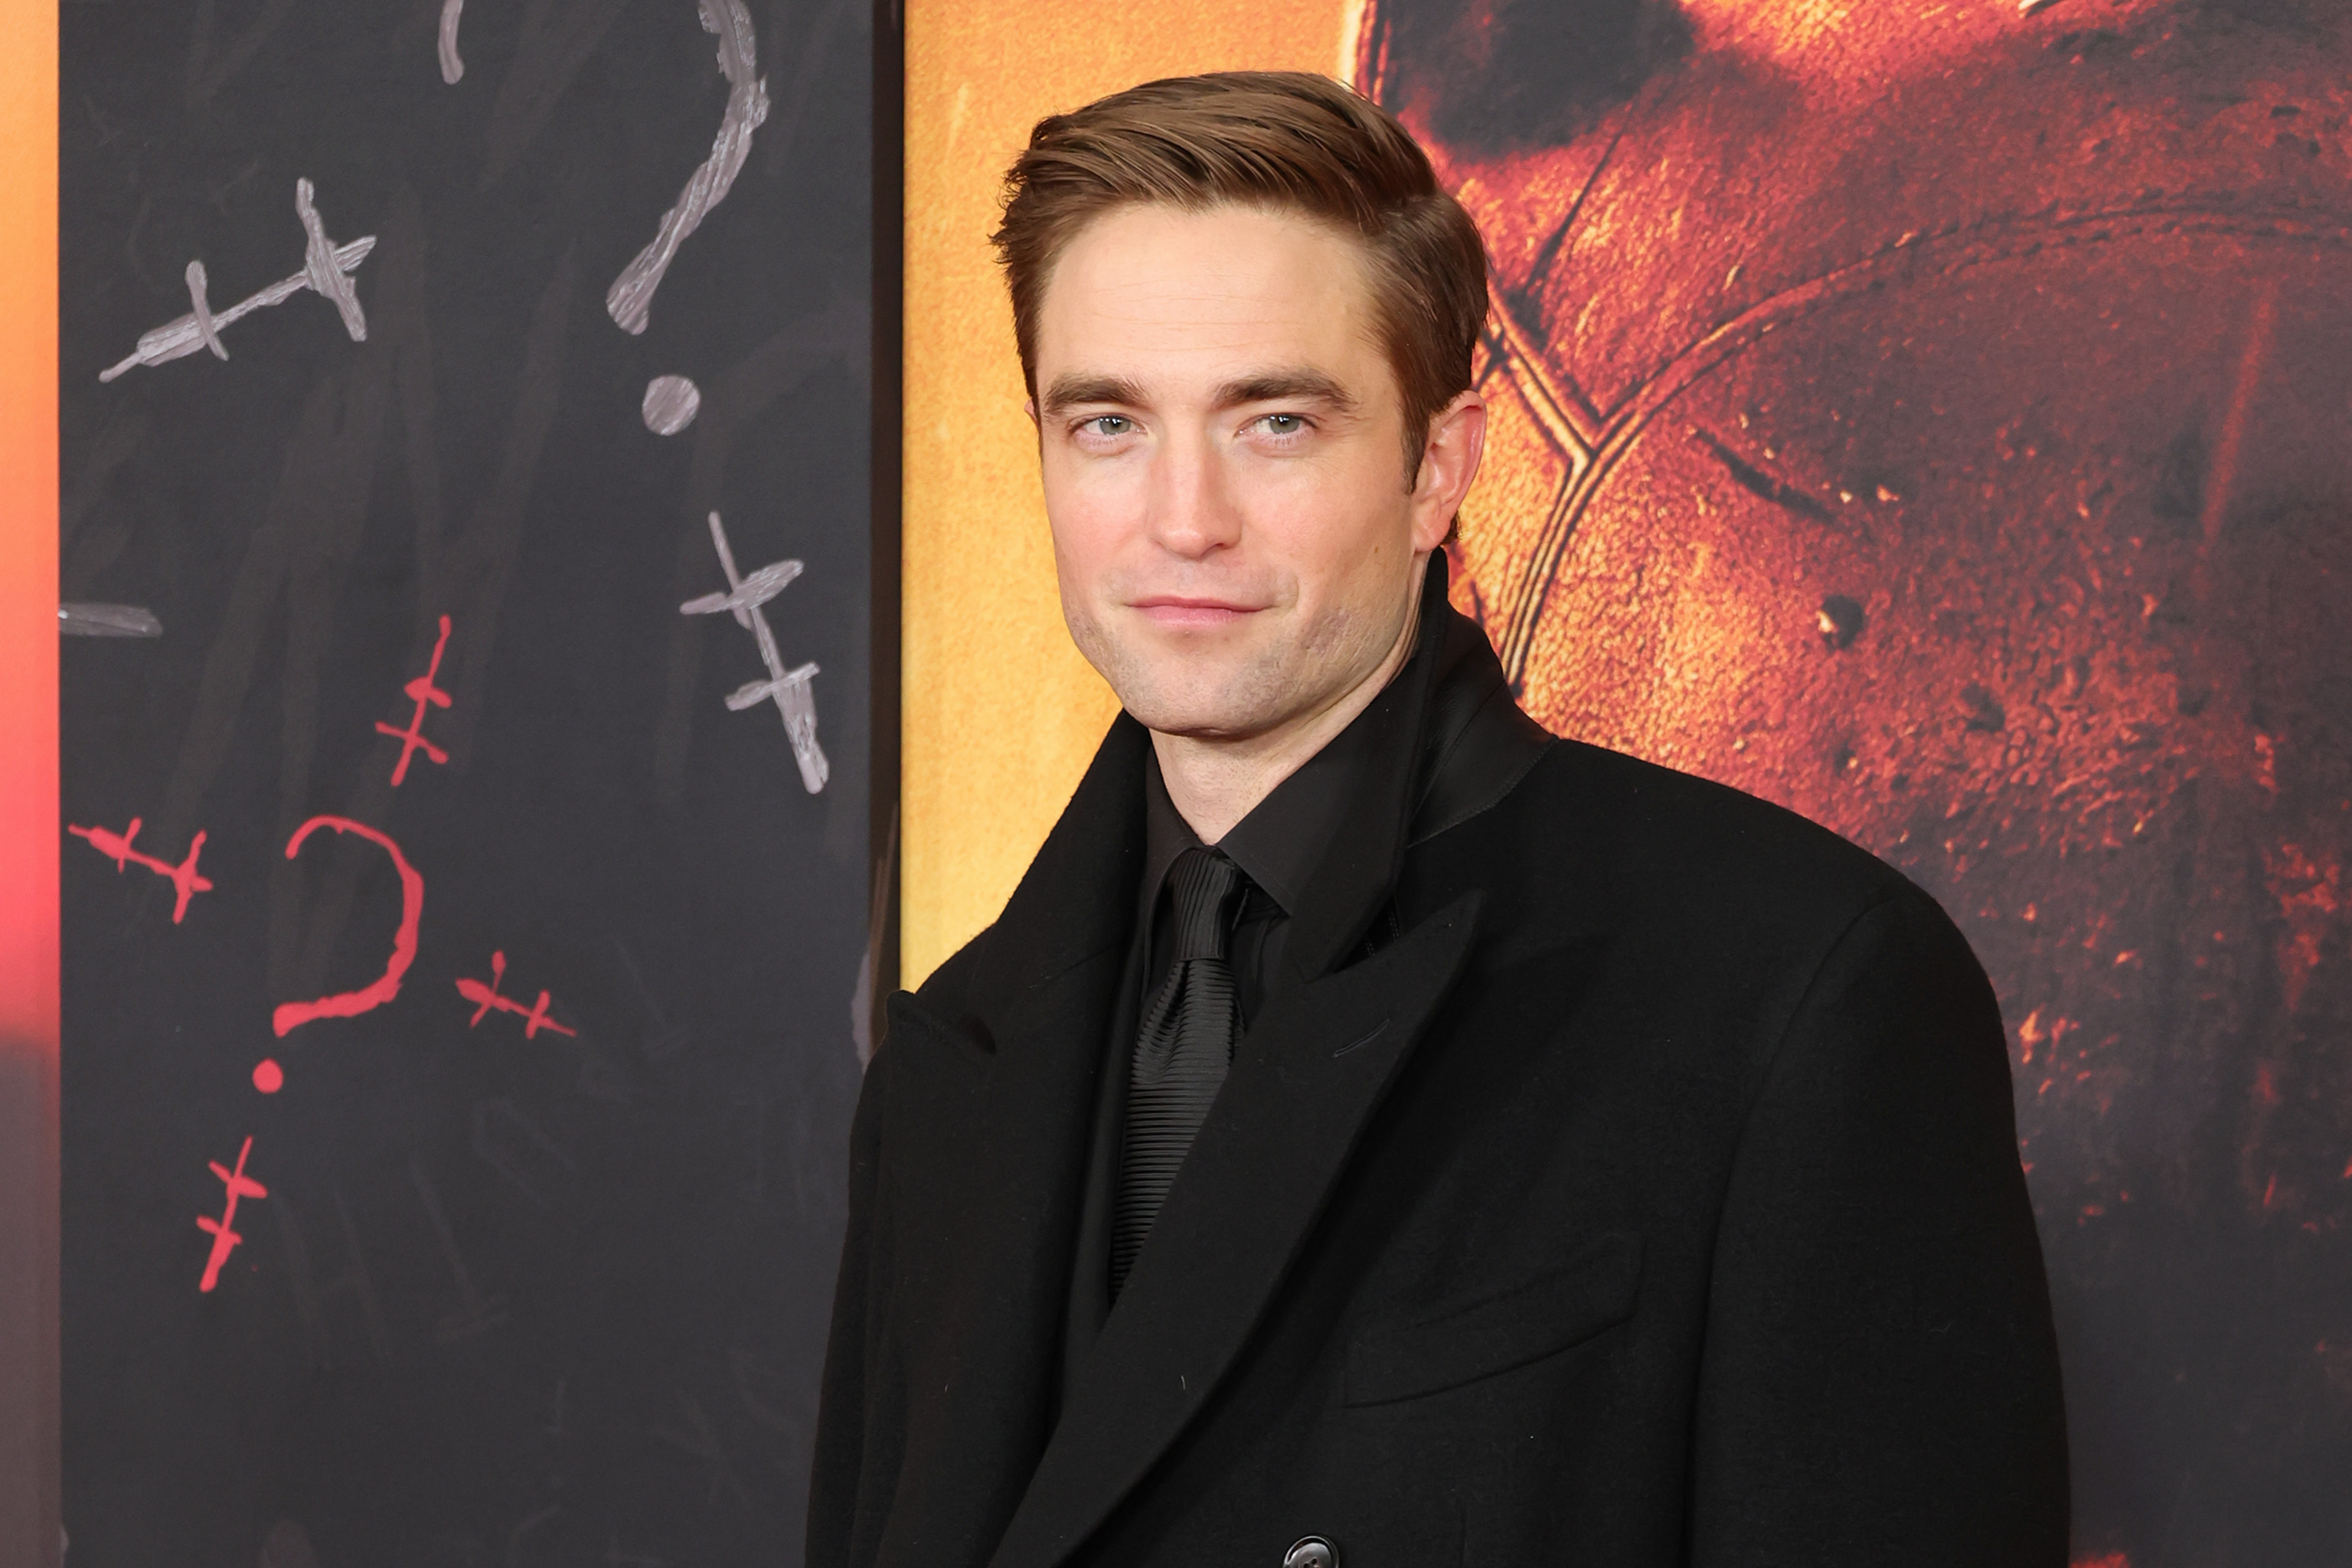 Robert Pattinson attends the premiere of the Warner Bros. movie The Batman, now streaming on HBO Max